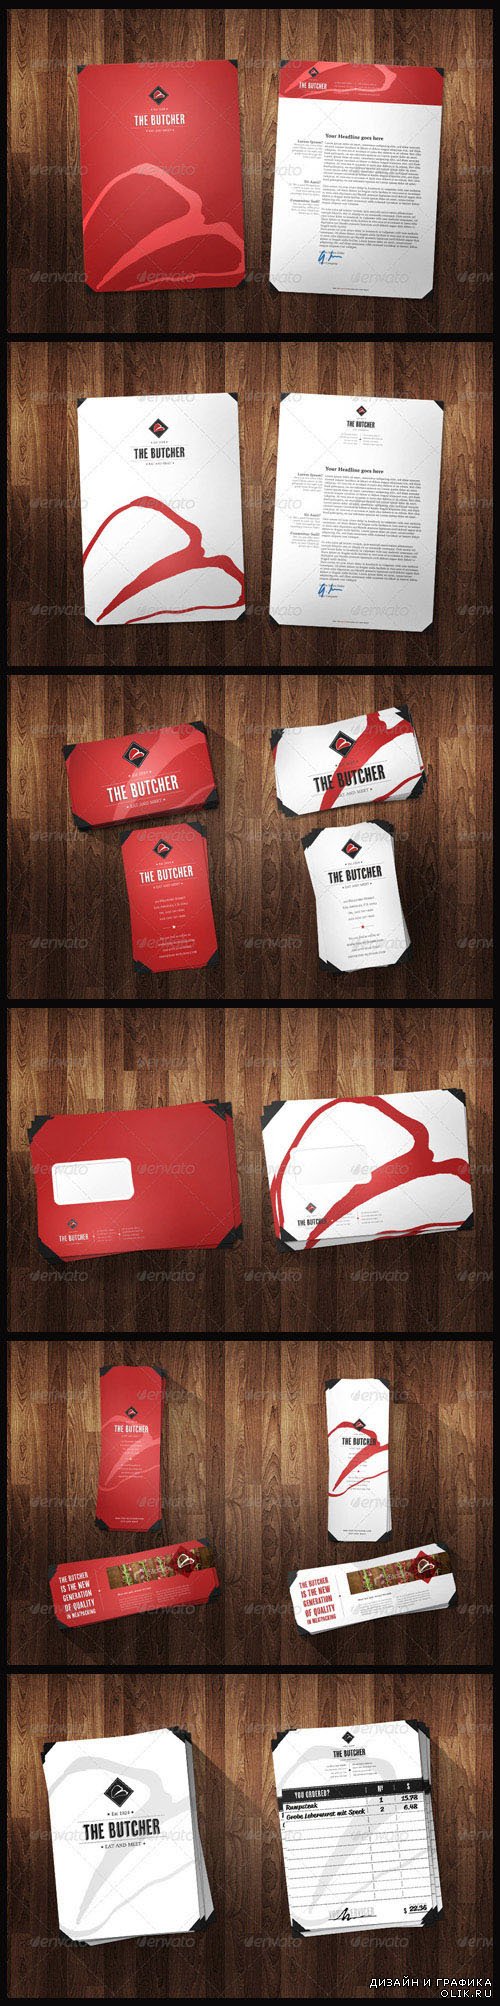 Corporate Identity Pack - Red & White Versions